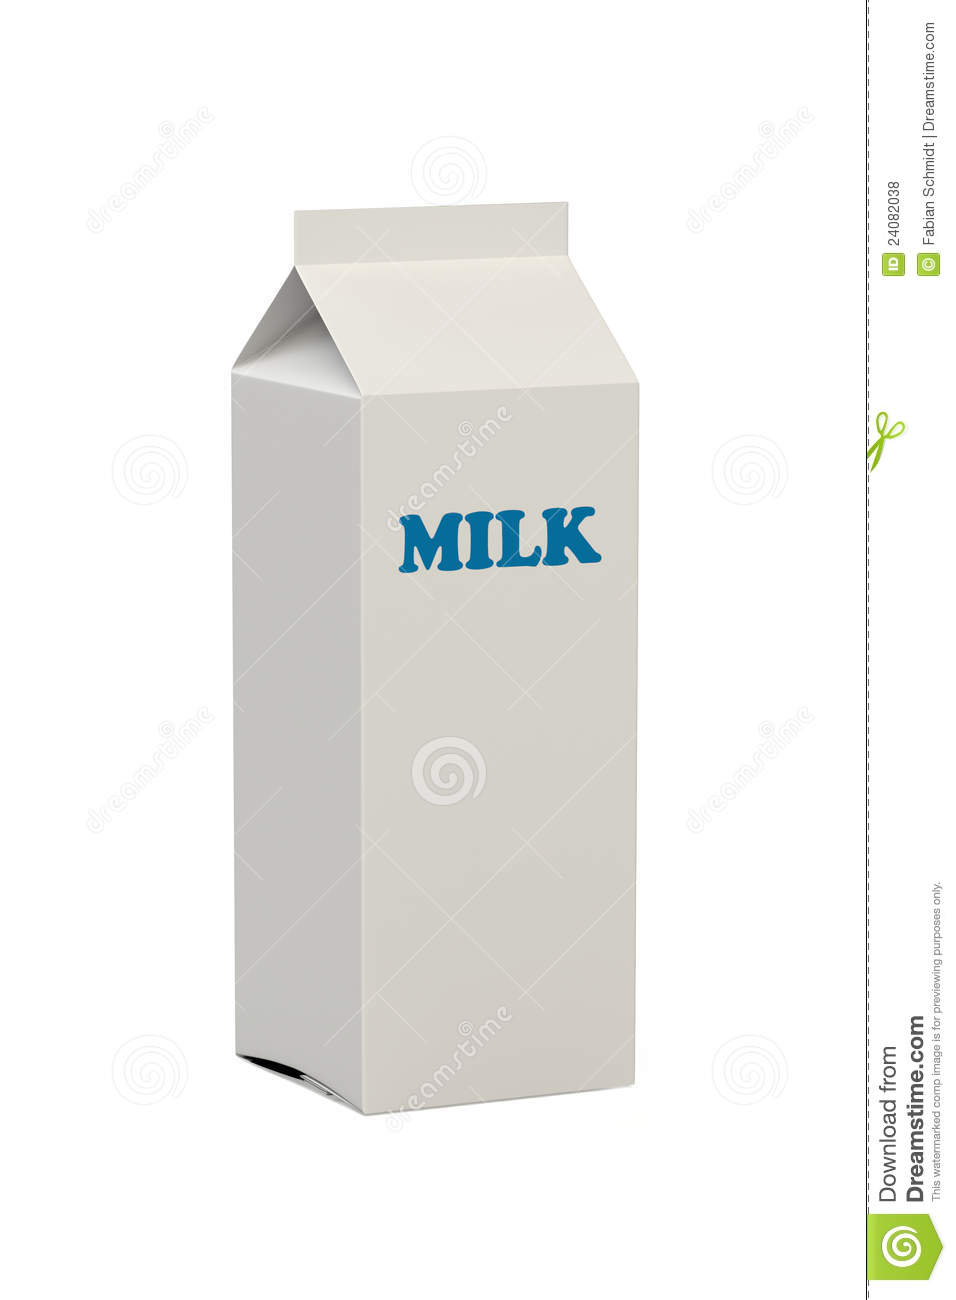 Blank White Milk Carton With The Word Milk In Blue Letters On A